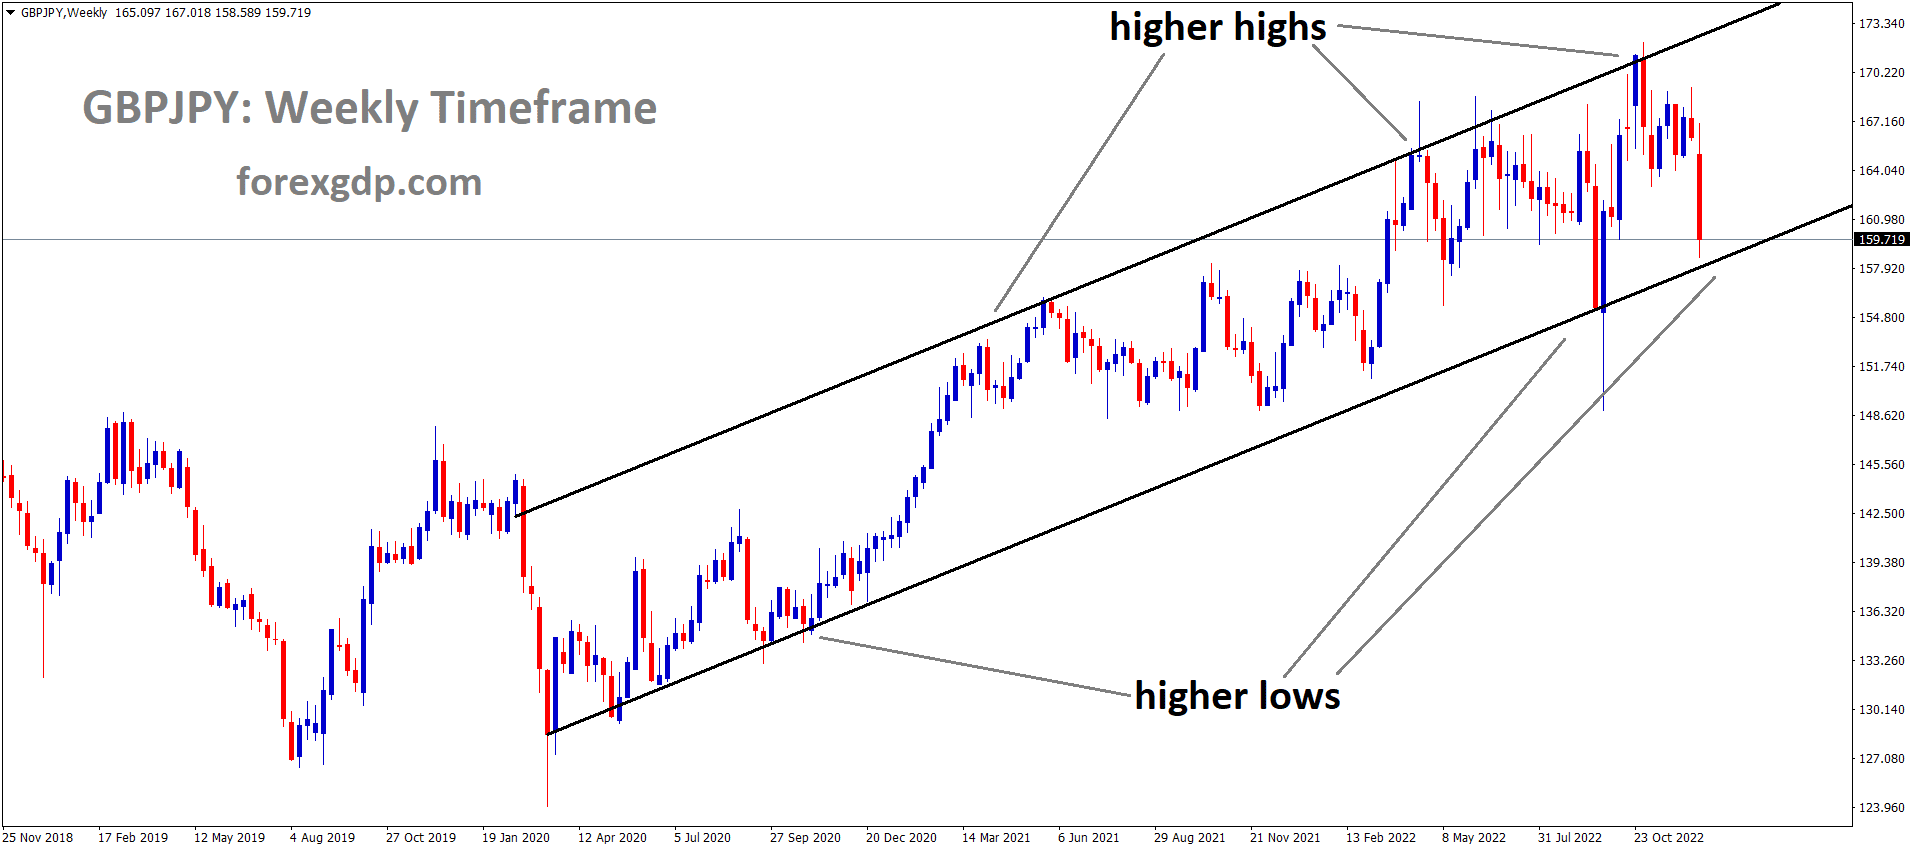 GBPJPY is moving in an Ascending channel and the market has reached the higher low area of the channel